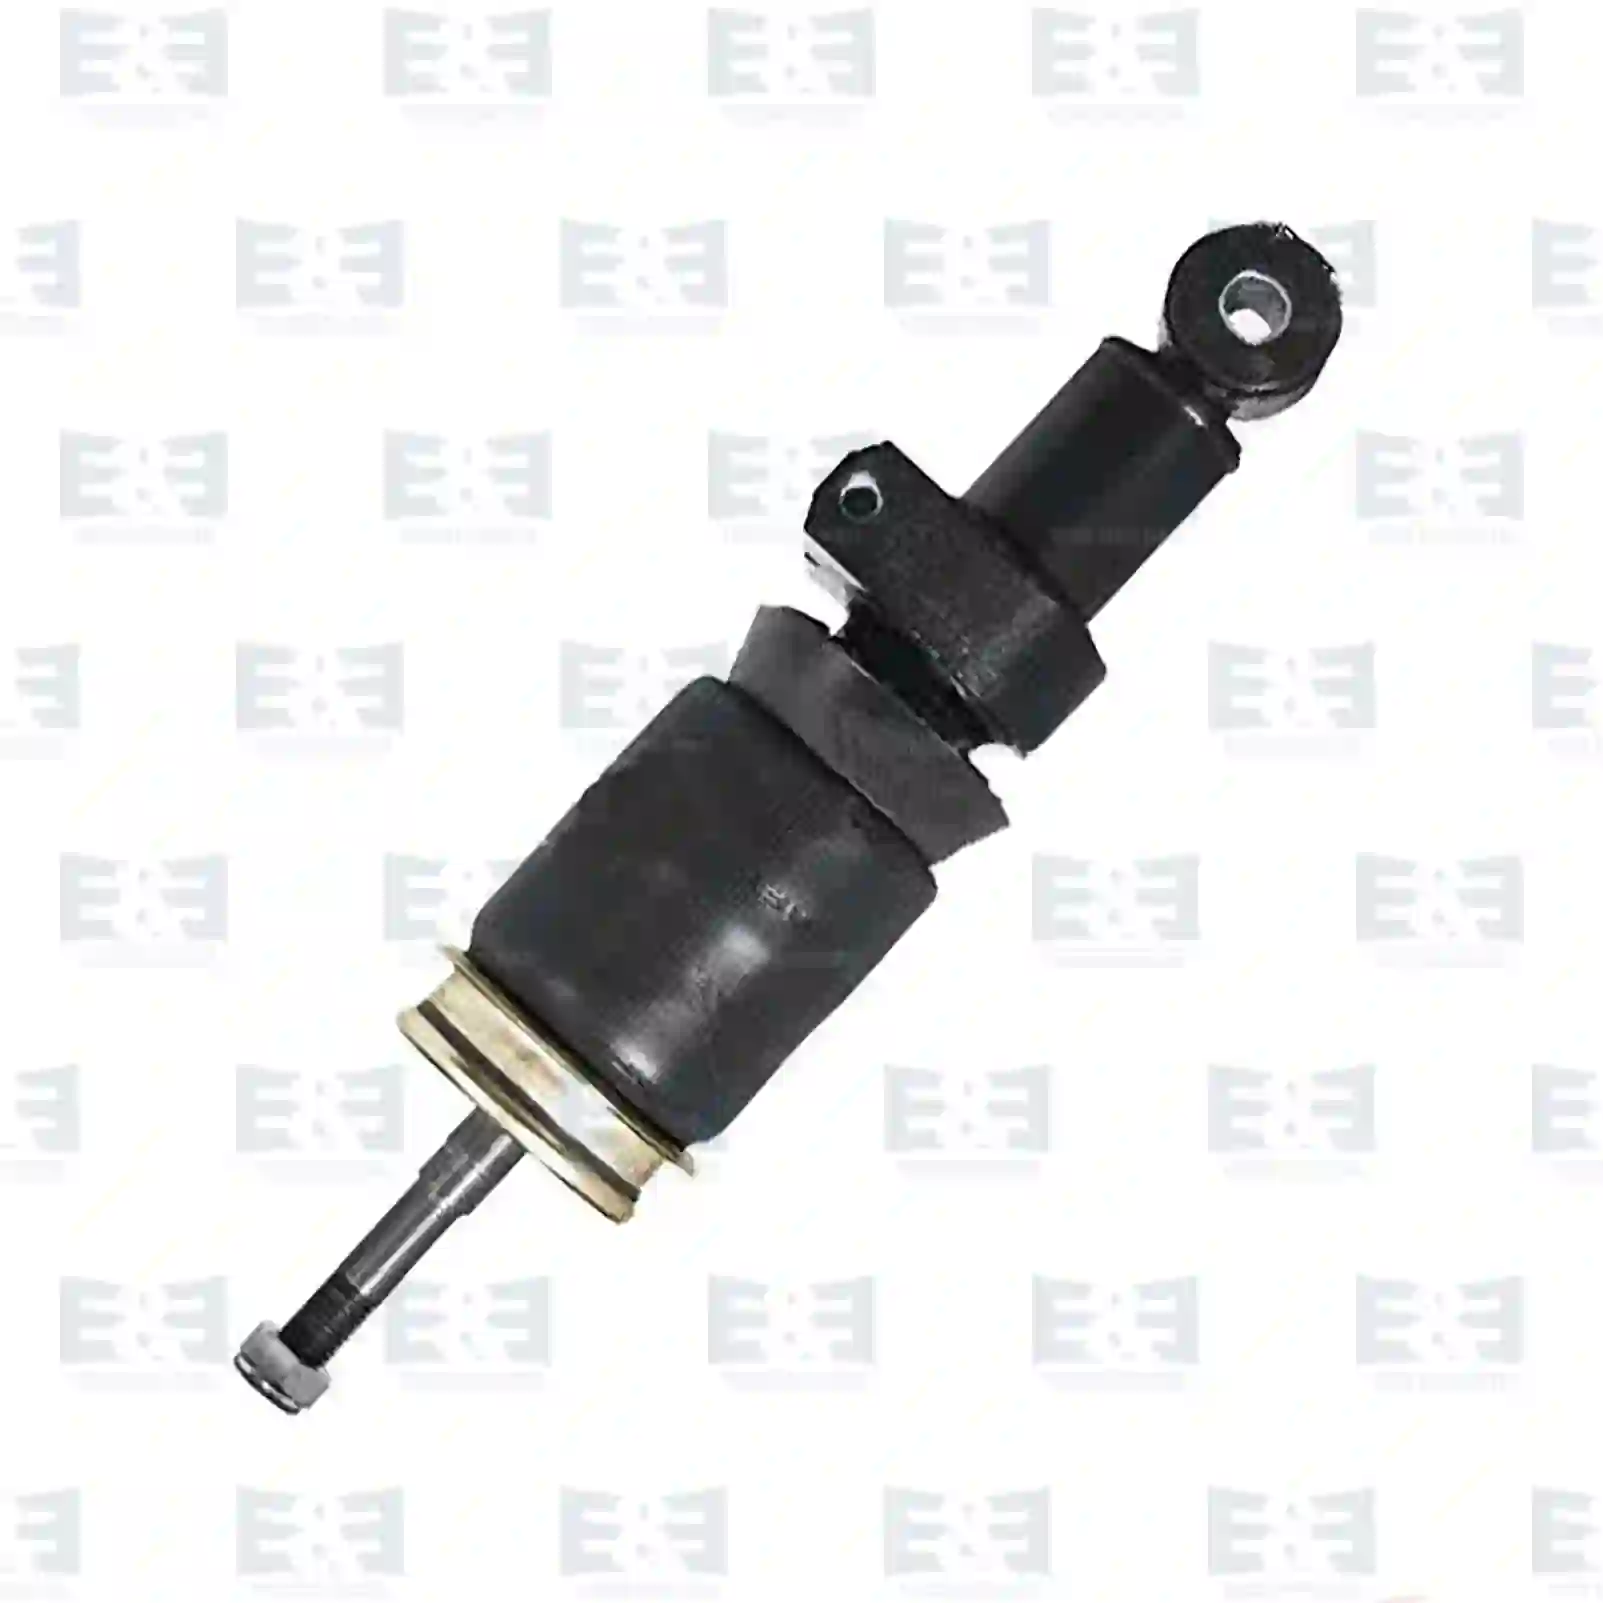  Cabin shock absorber, with air bellow || E&E Truck Spare Parts | Truck Spare Parts, Auotomotive Spare Parts